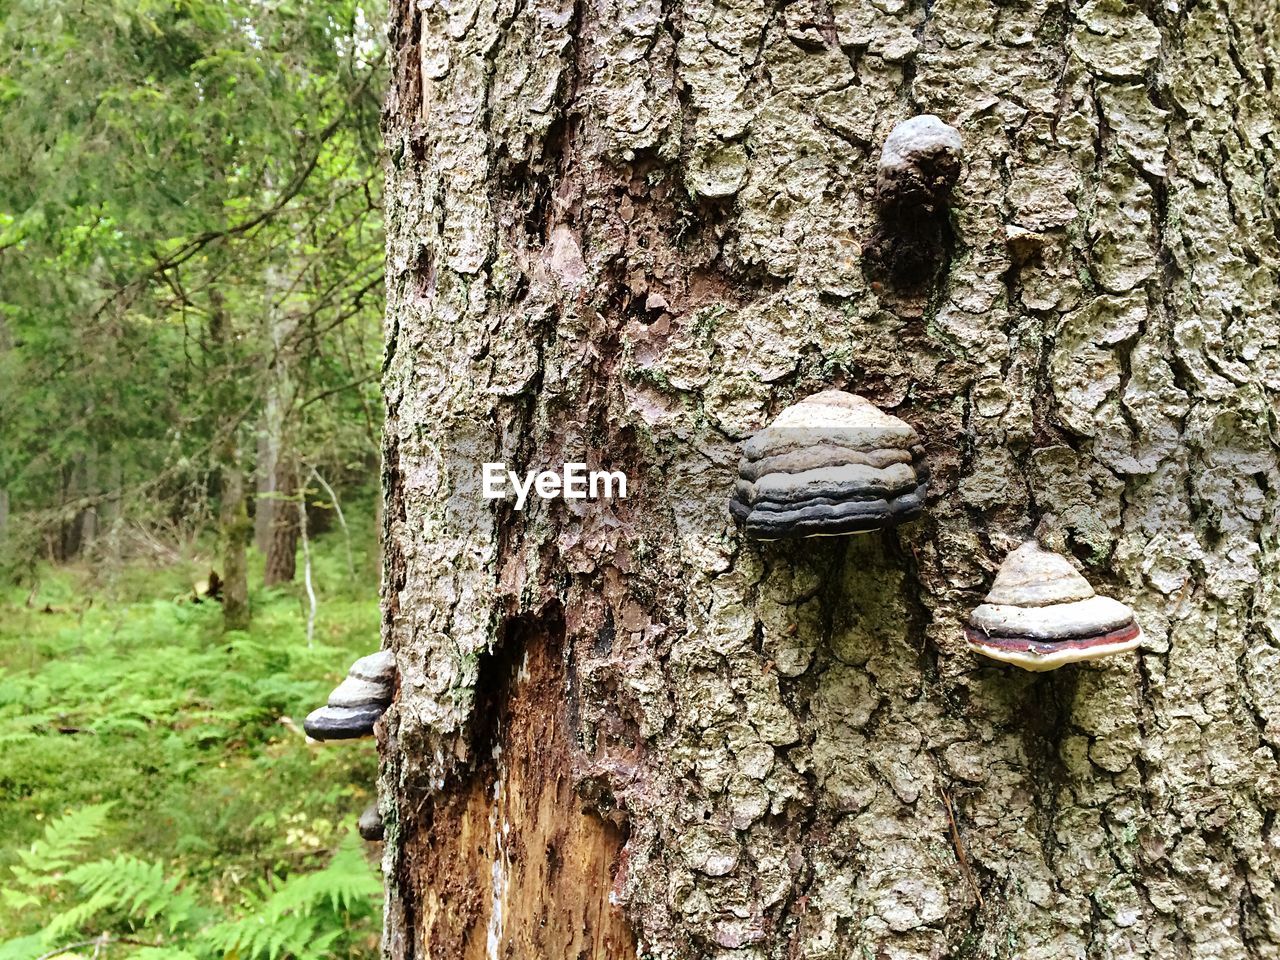 Cropped image of mushroom on tree trunk in forest